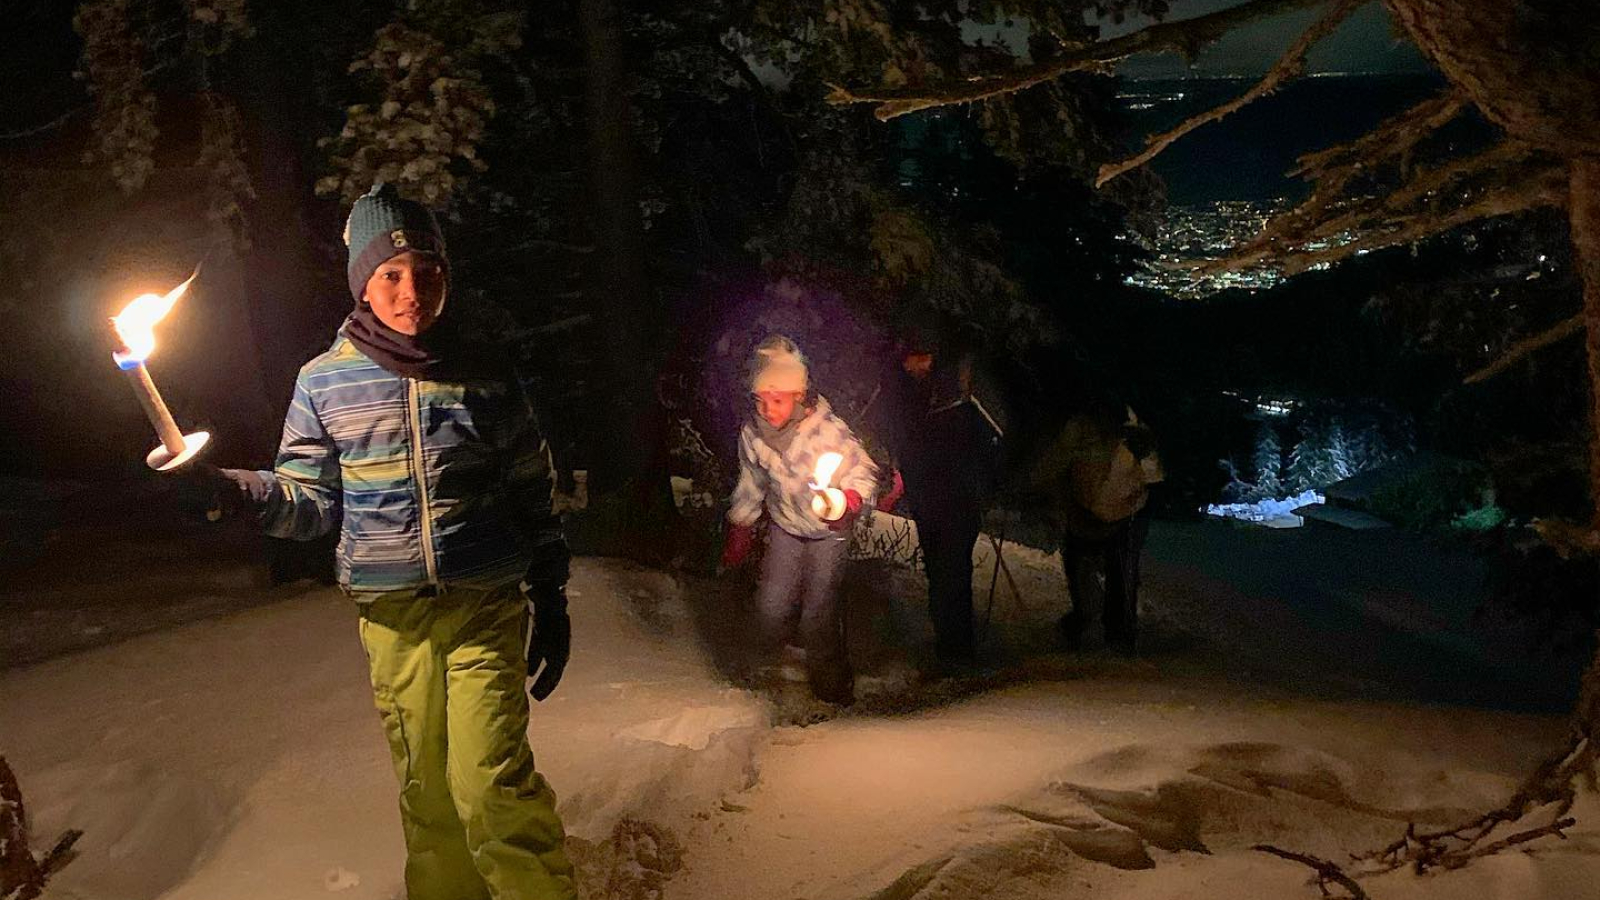 night snowshoeing with torches